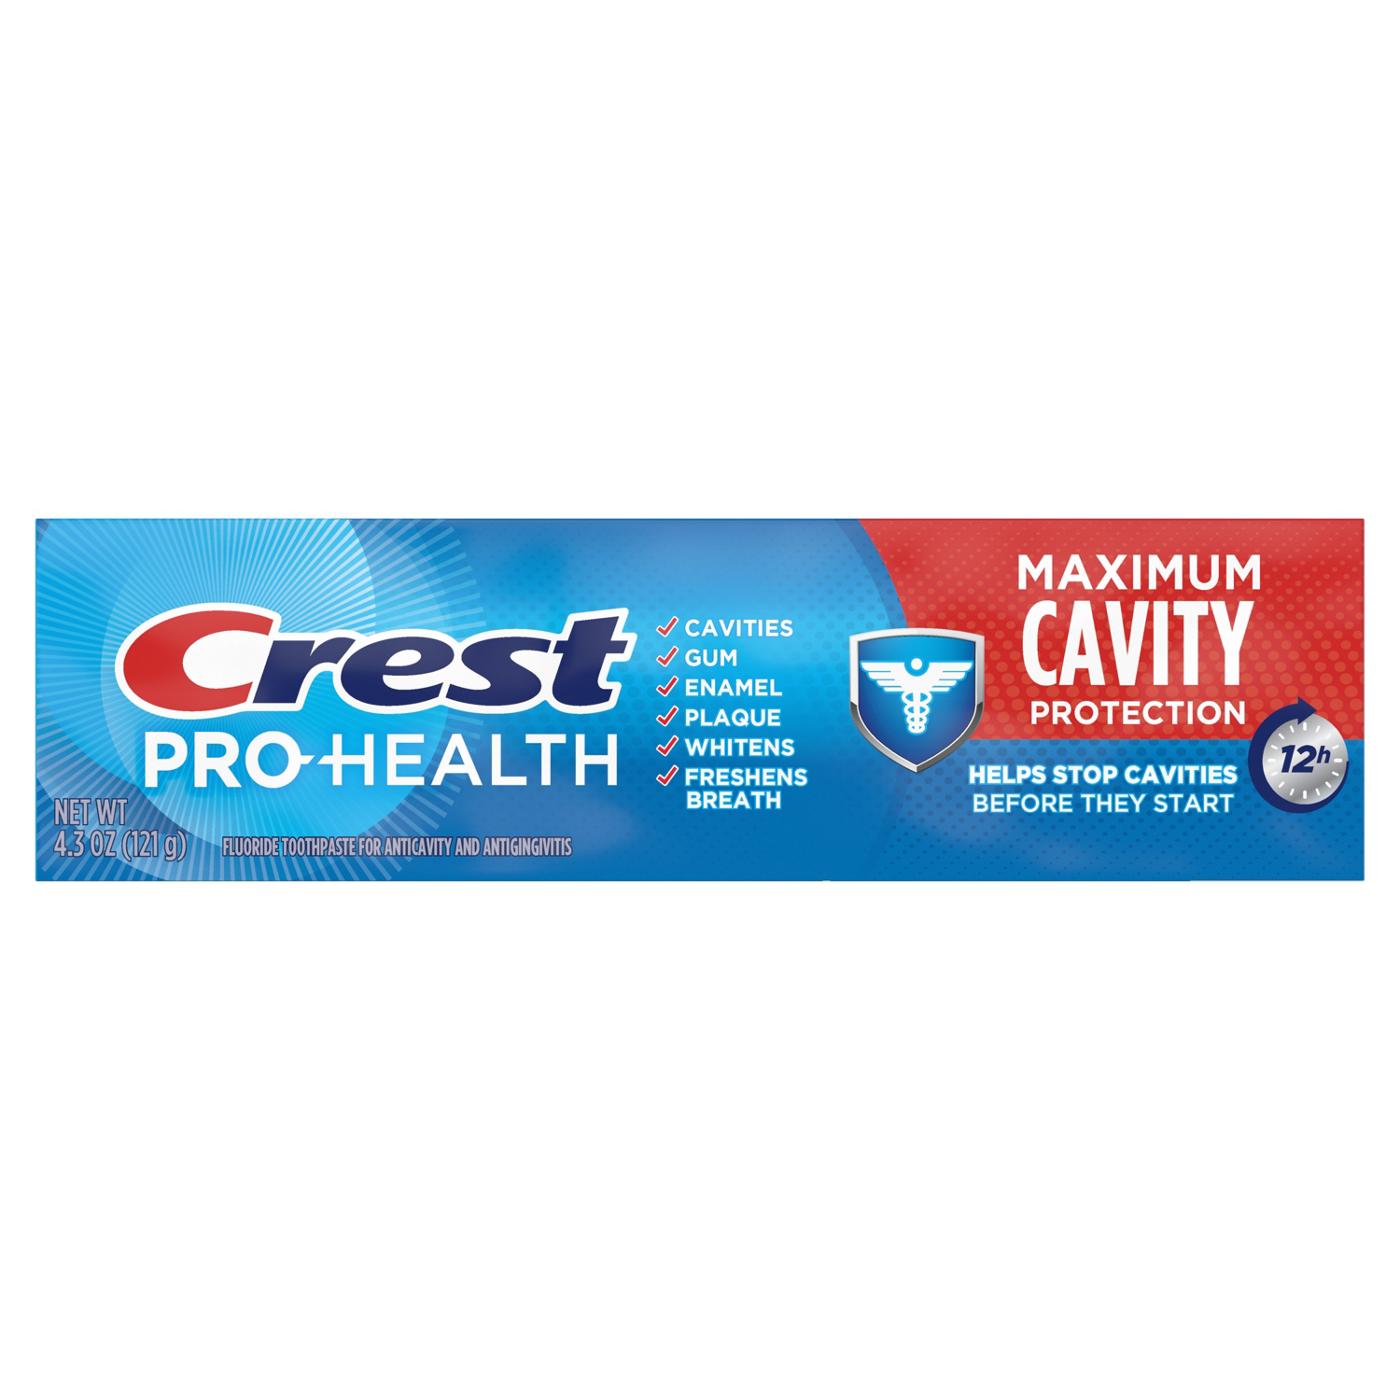 Crest Pro Health Maximum Cavity Protection Toothpaste; image 1 of 5